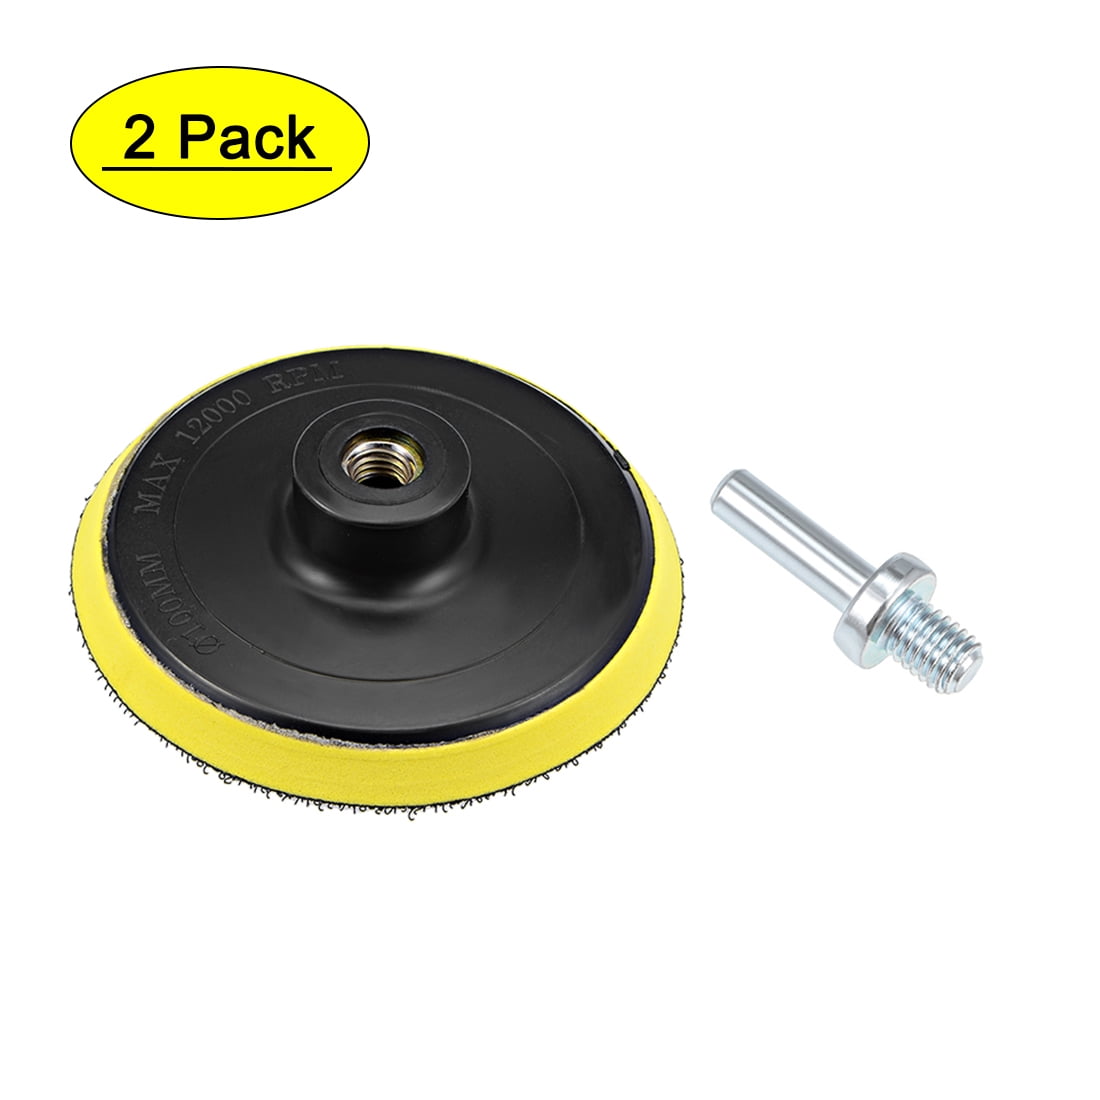 10Pc 4" Dry Sanding Disc sandpaper 1000 with Backer Pad  Drill Adapter 